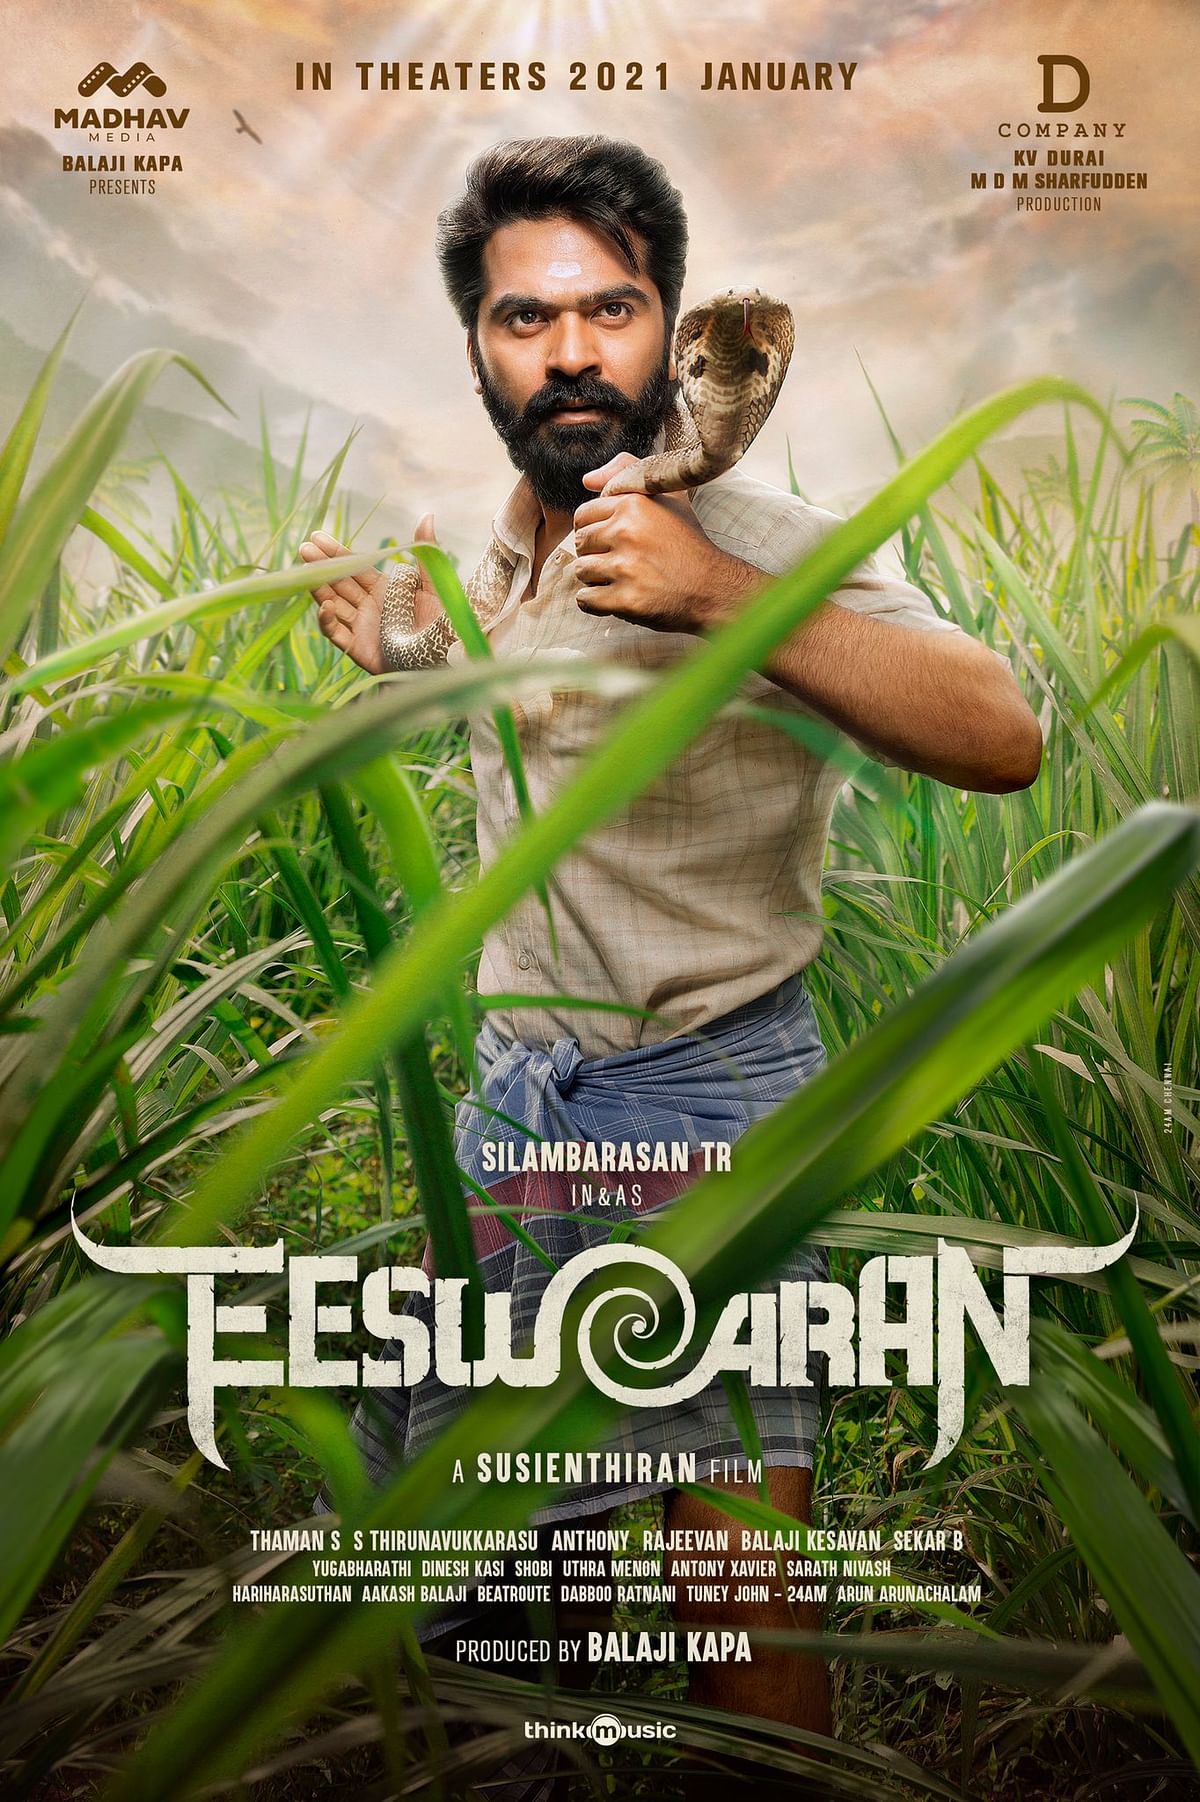 Actor Silambarasan, also known as STR’s film Eeswaran is slated for a Pongal release.